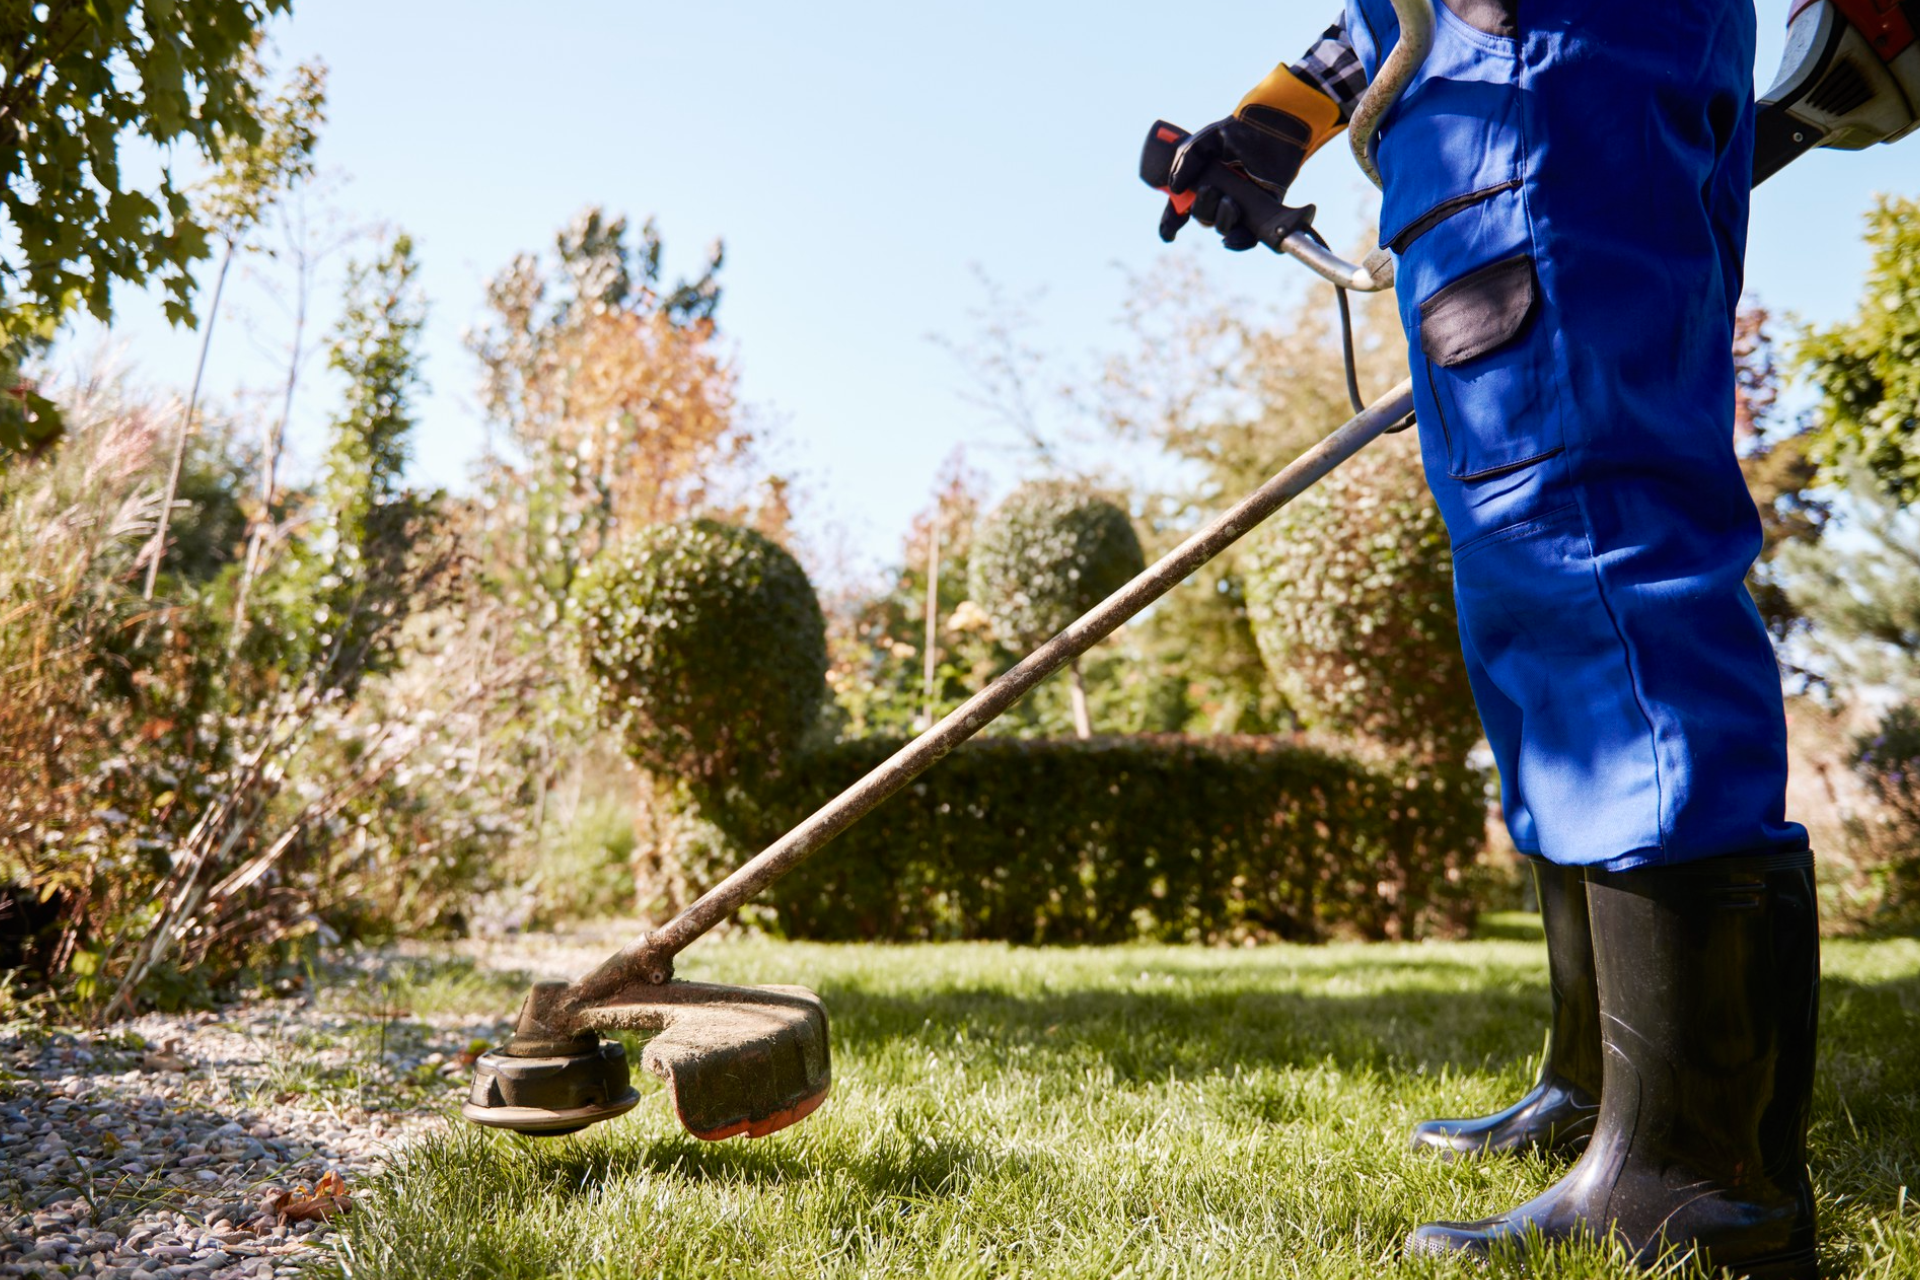 What Are the Benefits of Garden Maintenance Services for People with Disabilities?